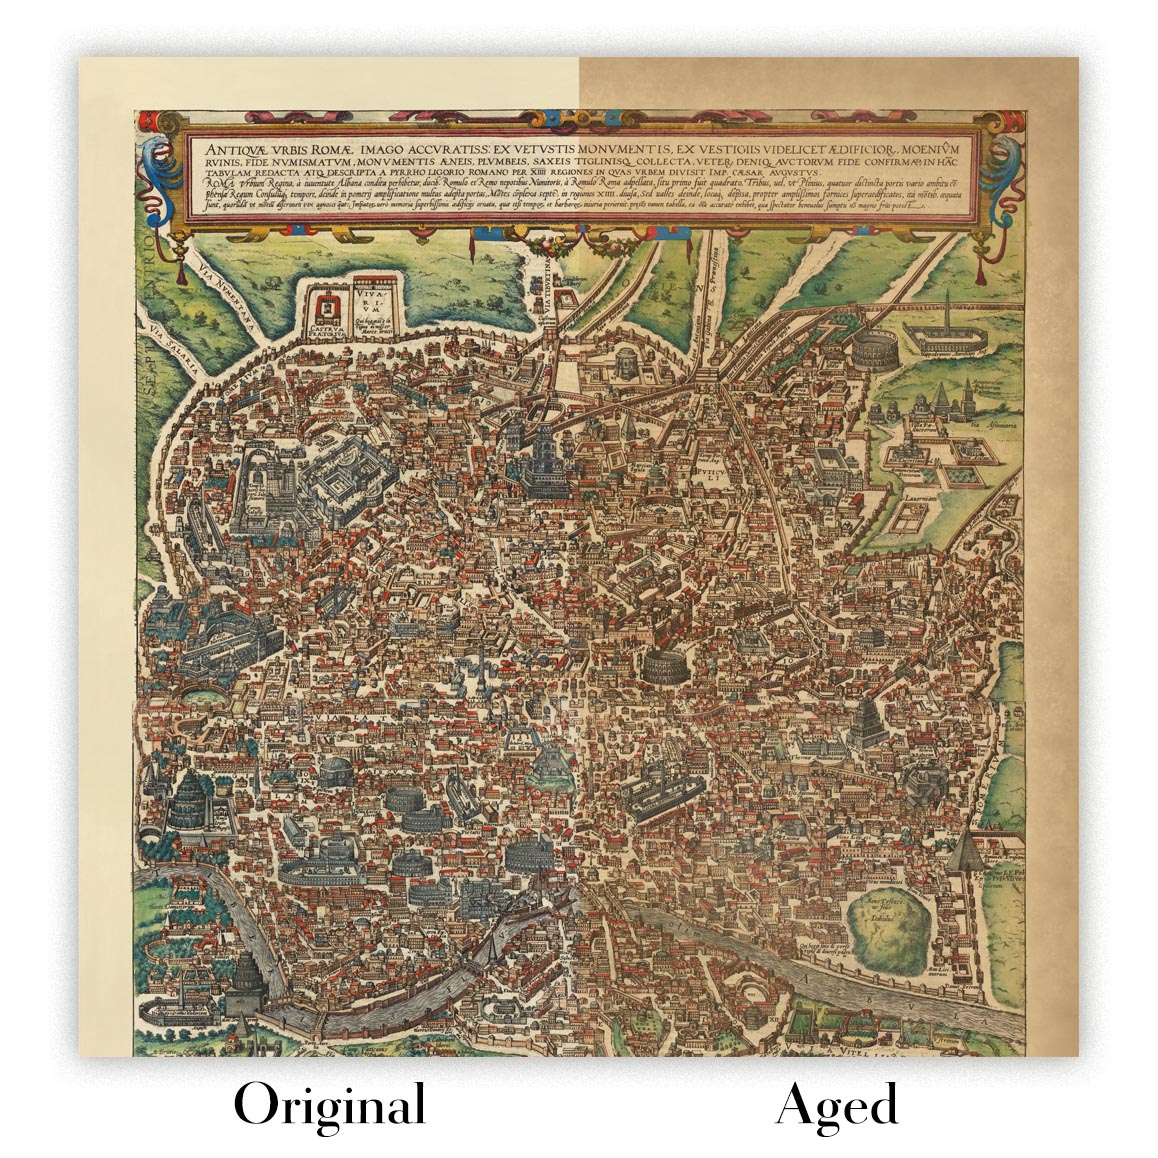 Image showing the difference between an Original map and an Aged toned map